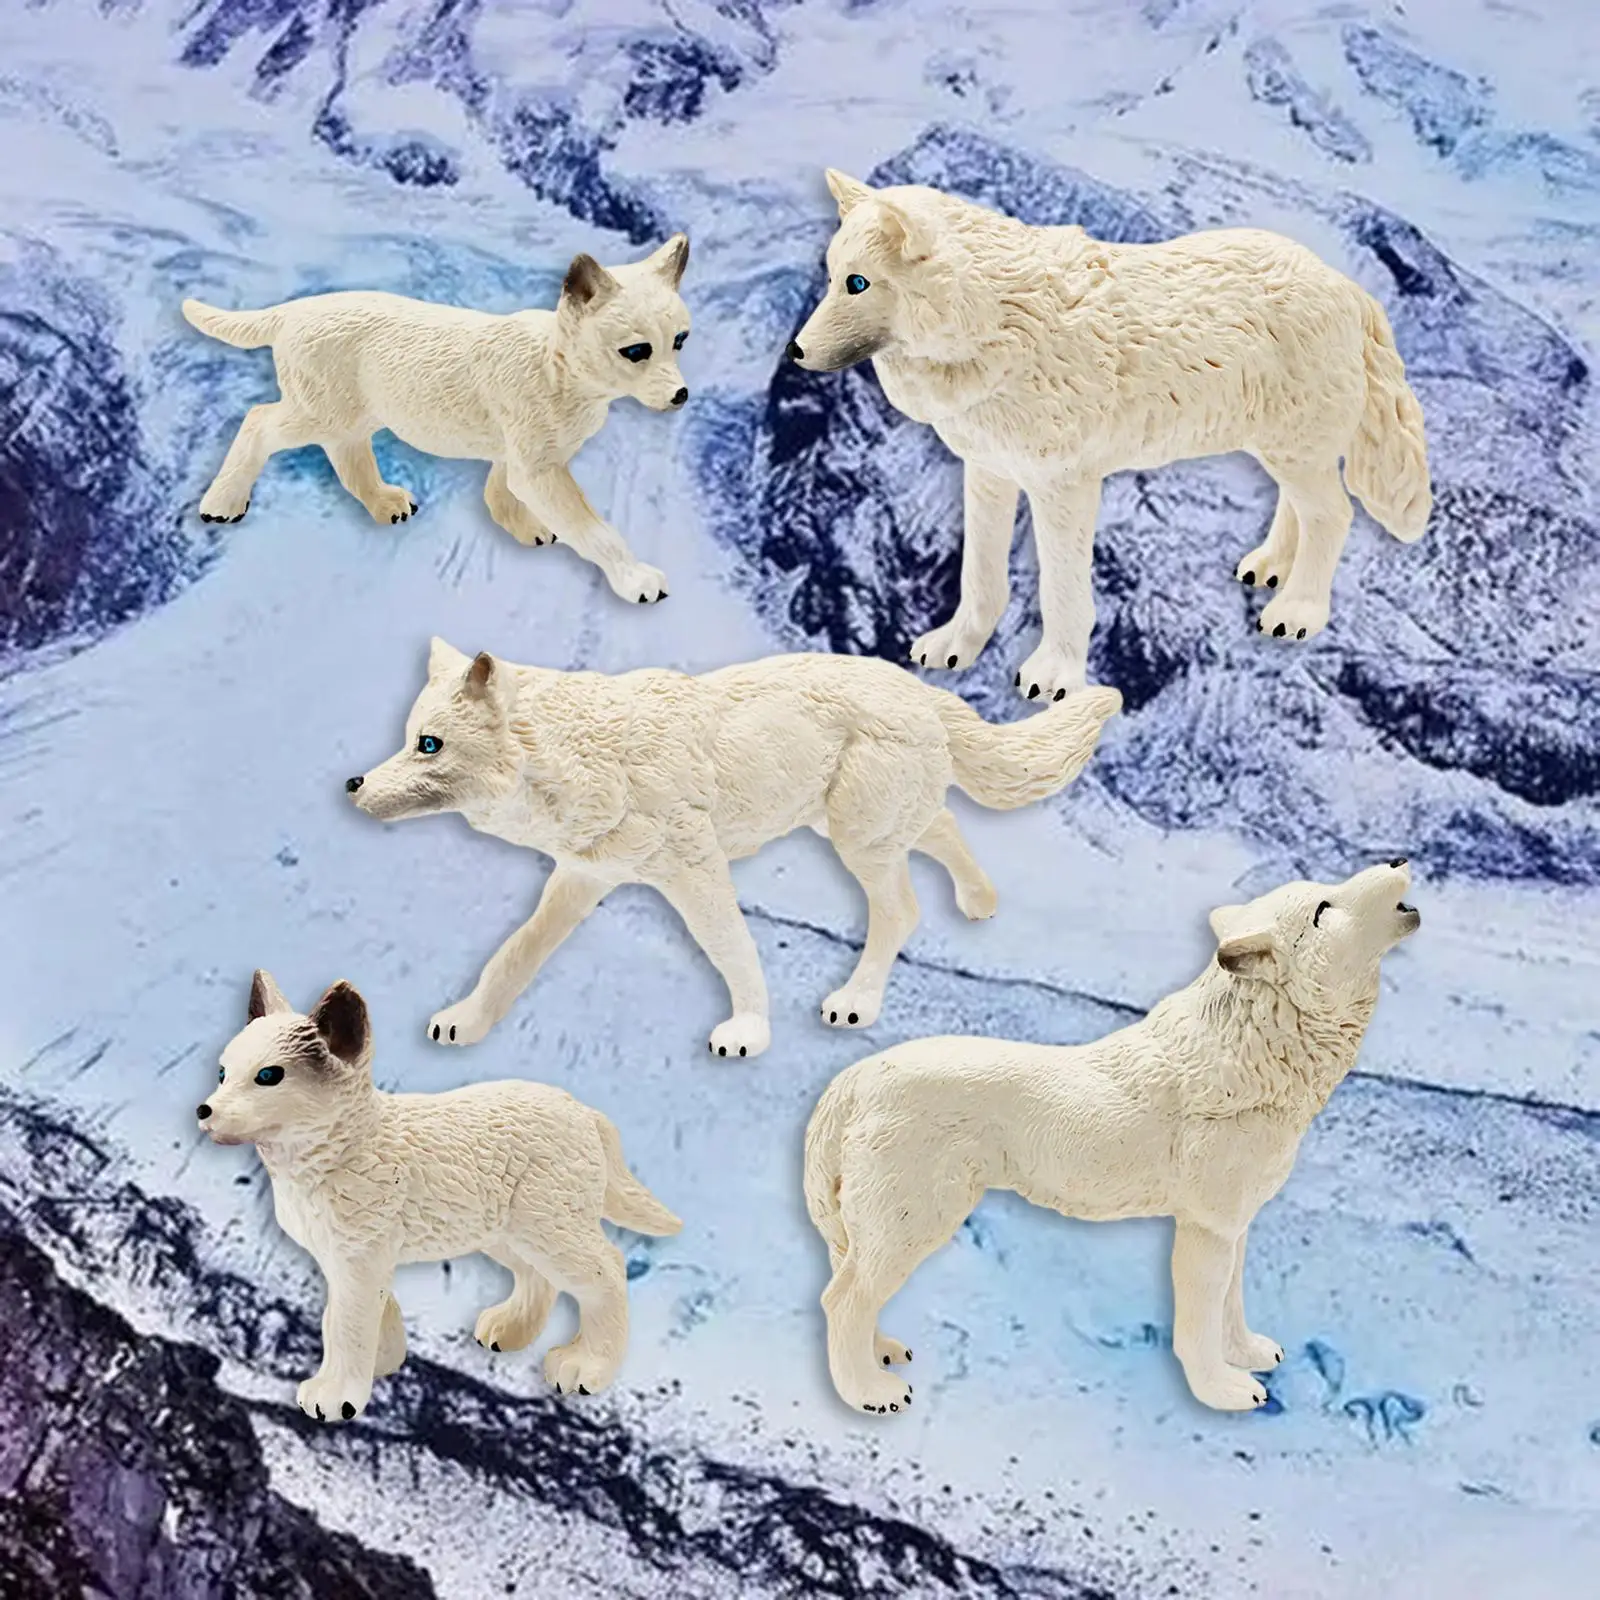 5 Pieces Wolf Figurines Wildlife Animal Statue for Educational Toys Xmas Present